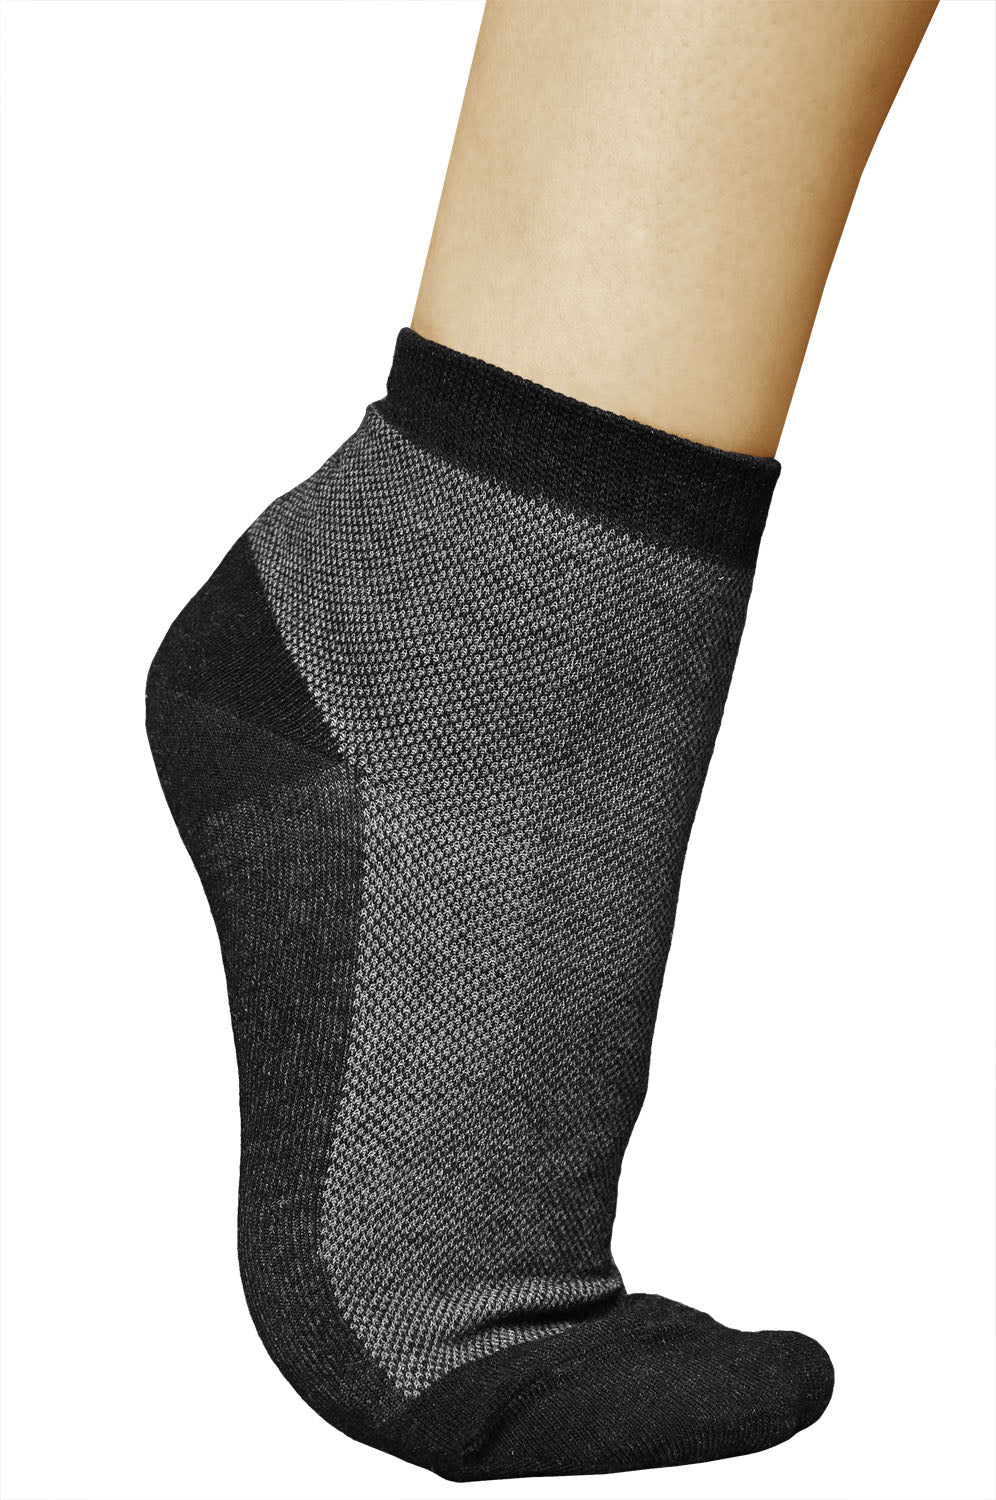 SWEAT GUARD® 5% Silver New Ankle Socks - 2 Pairs - Footcare